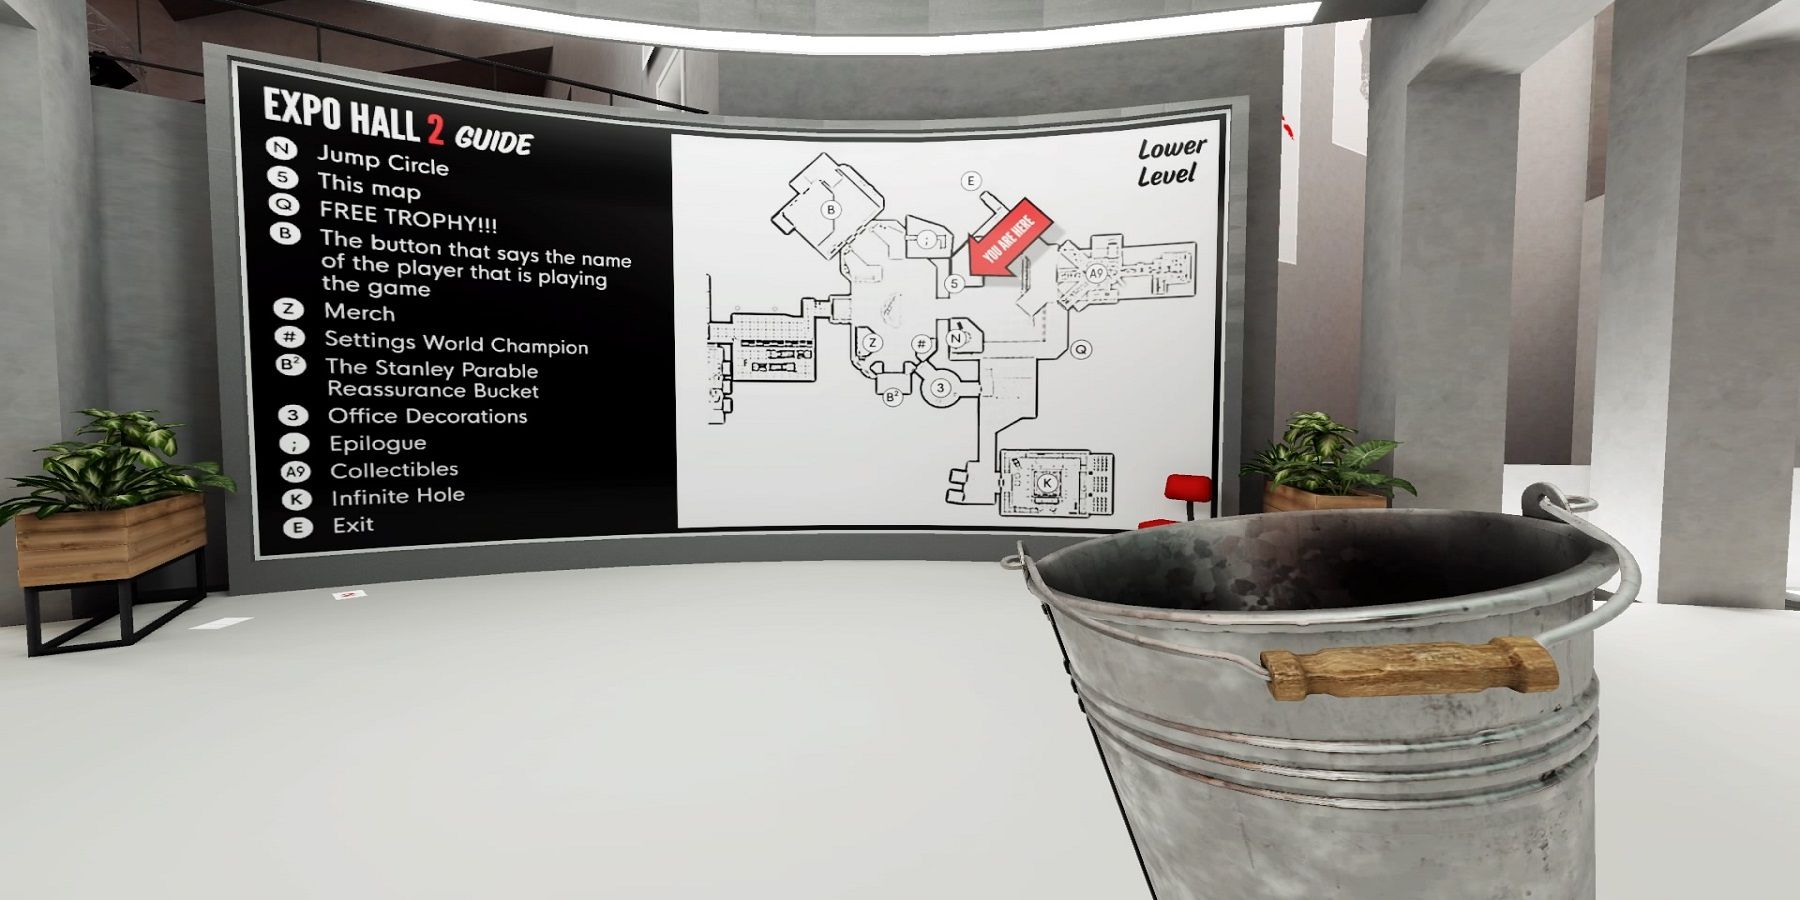 The Stanley Parable - Ultra Deluxe 2 Expo Map